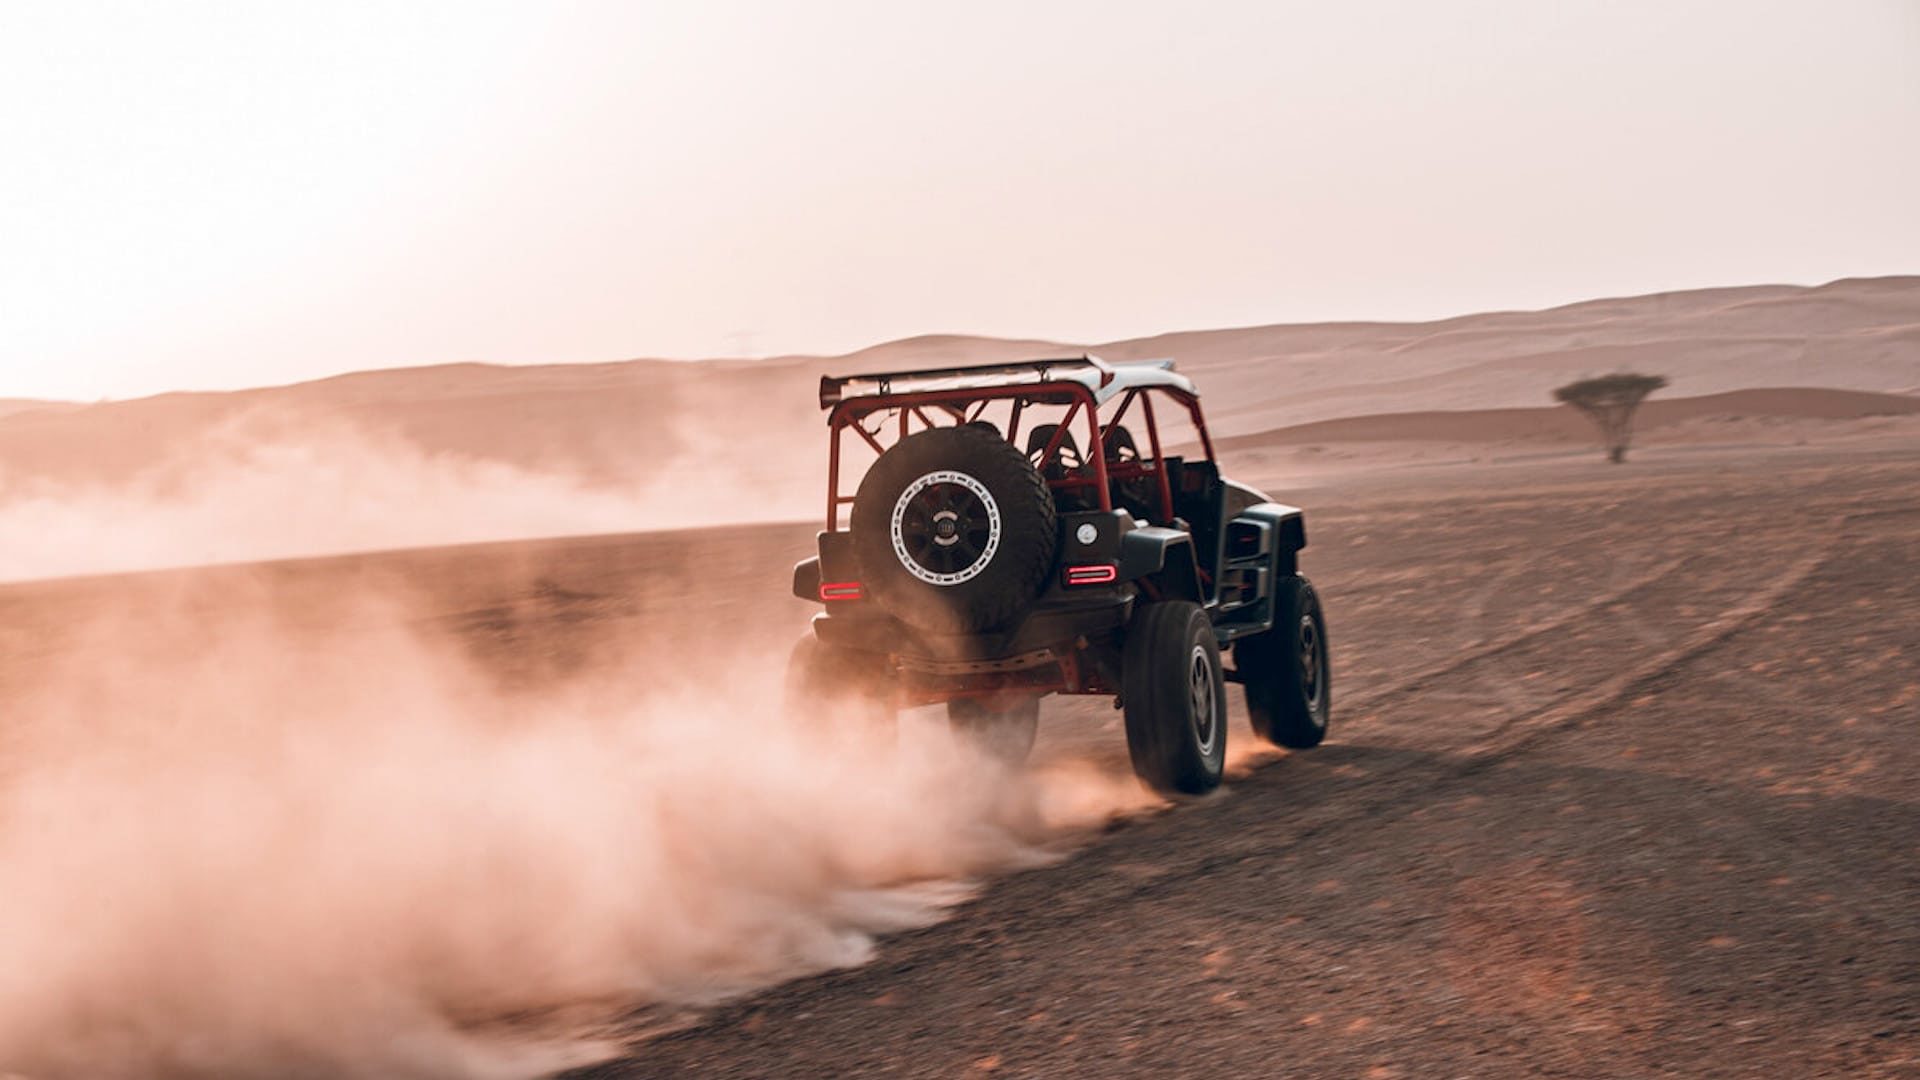 Brabus goes wild with 900hp G-Class dune buggy